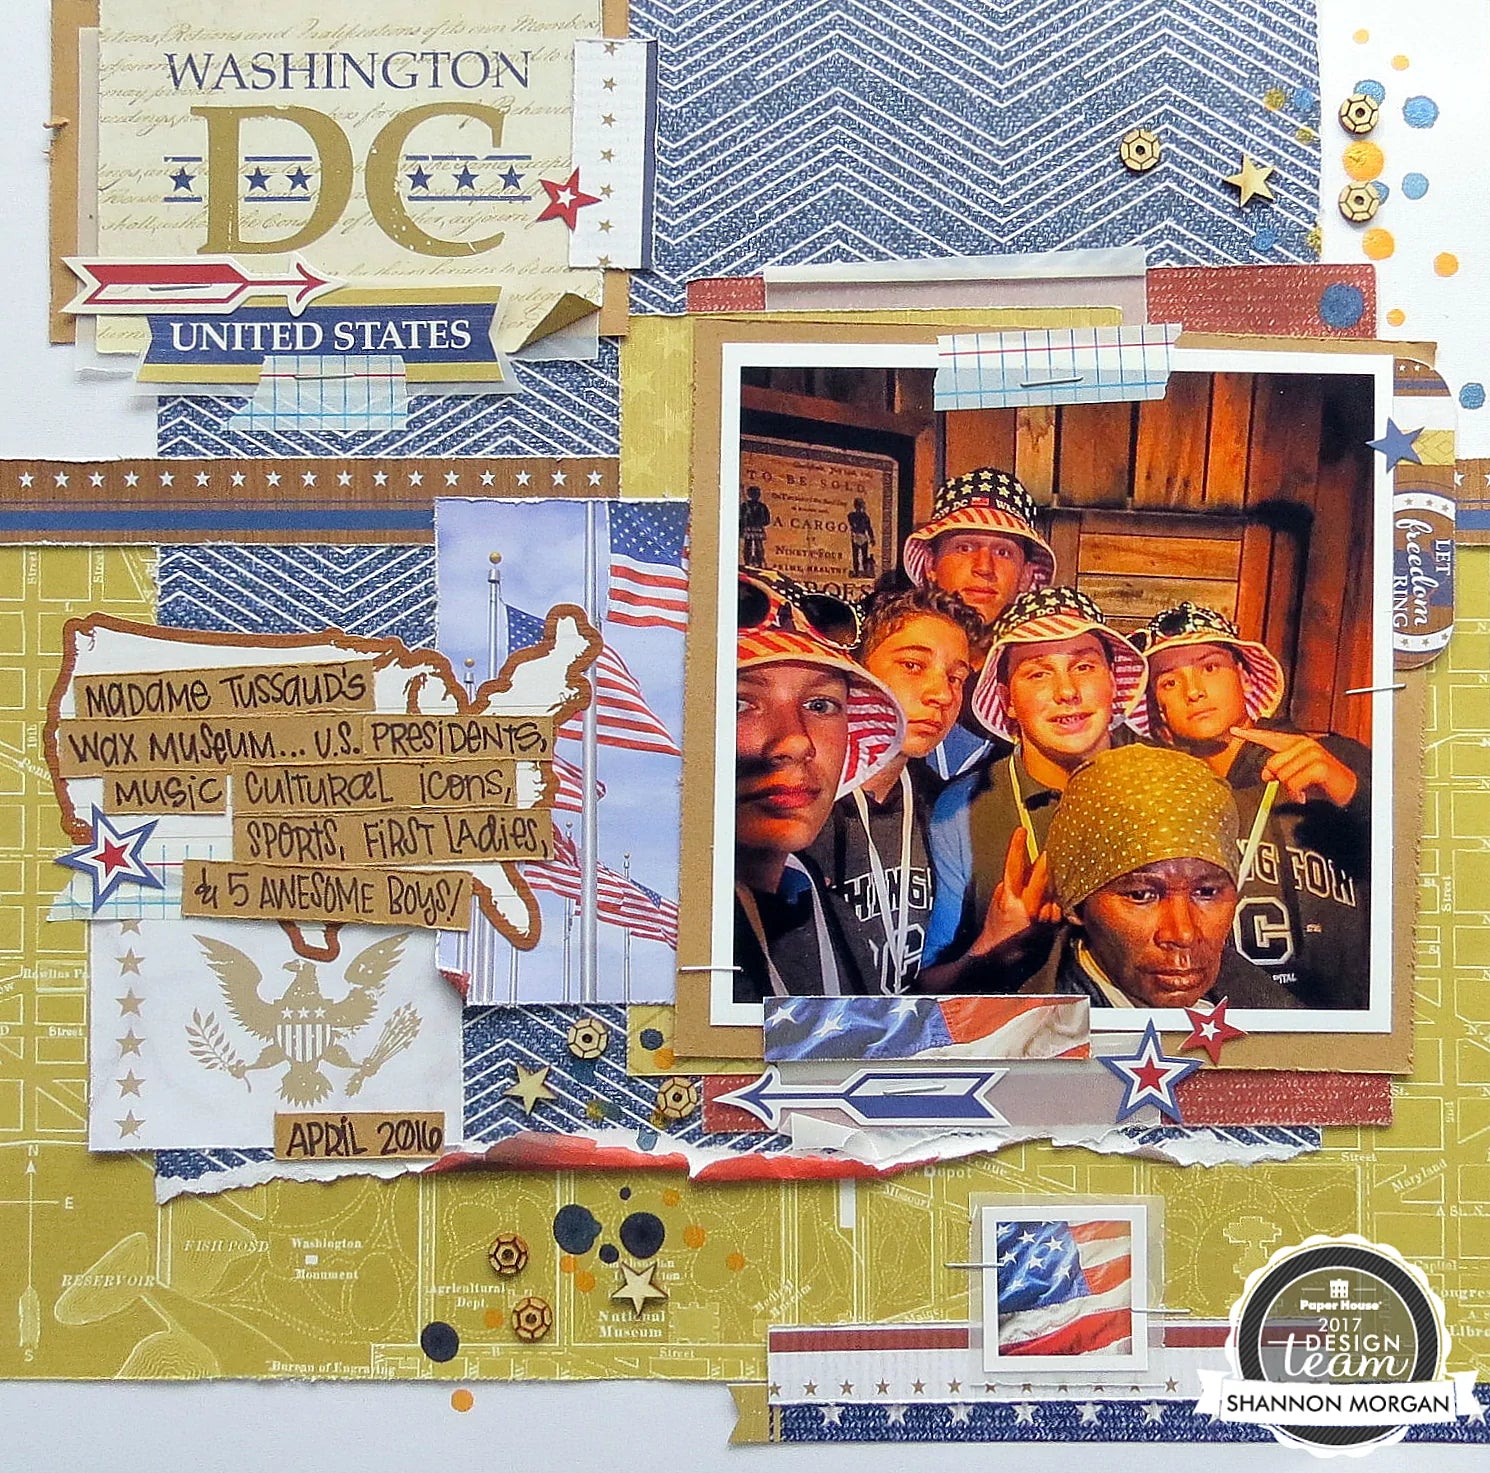 Paper House~12X12 LET FREEDOM RING~BOSTON~ paper crafting kit~Quick Ship